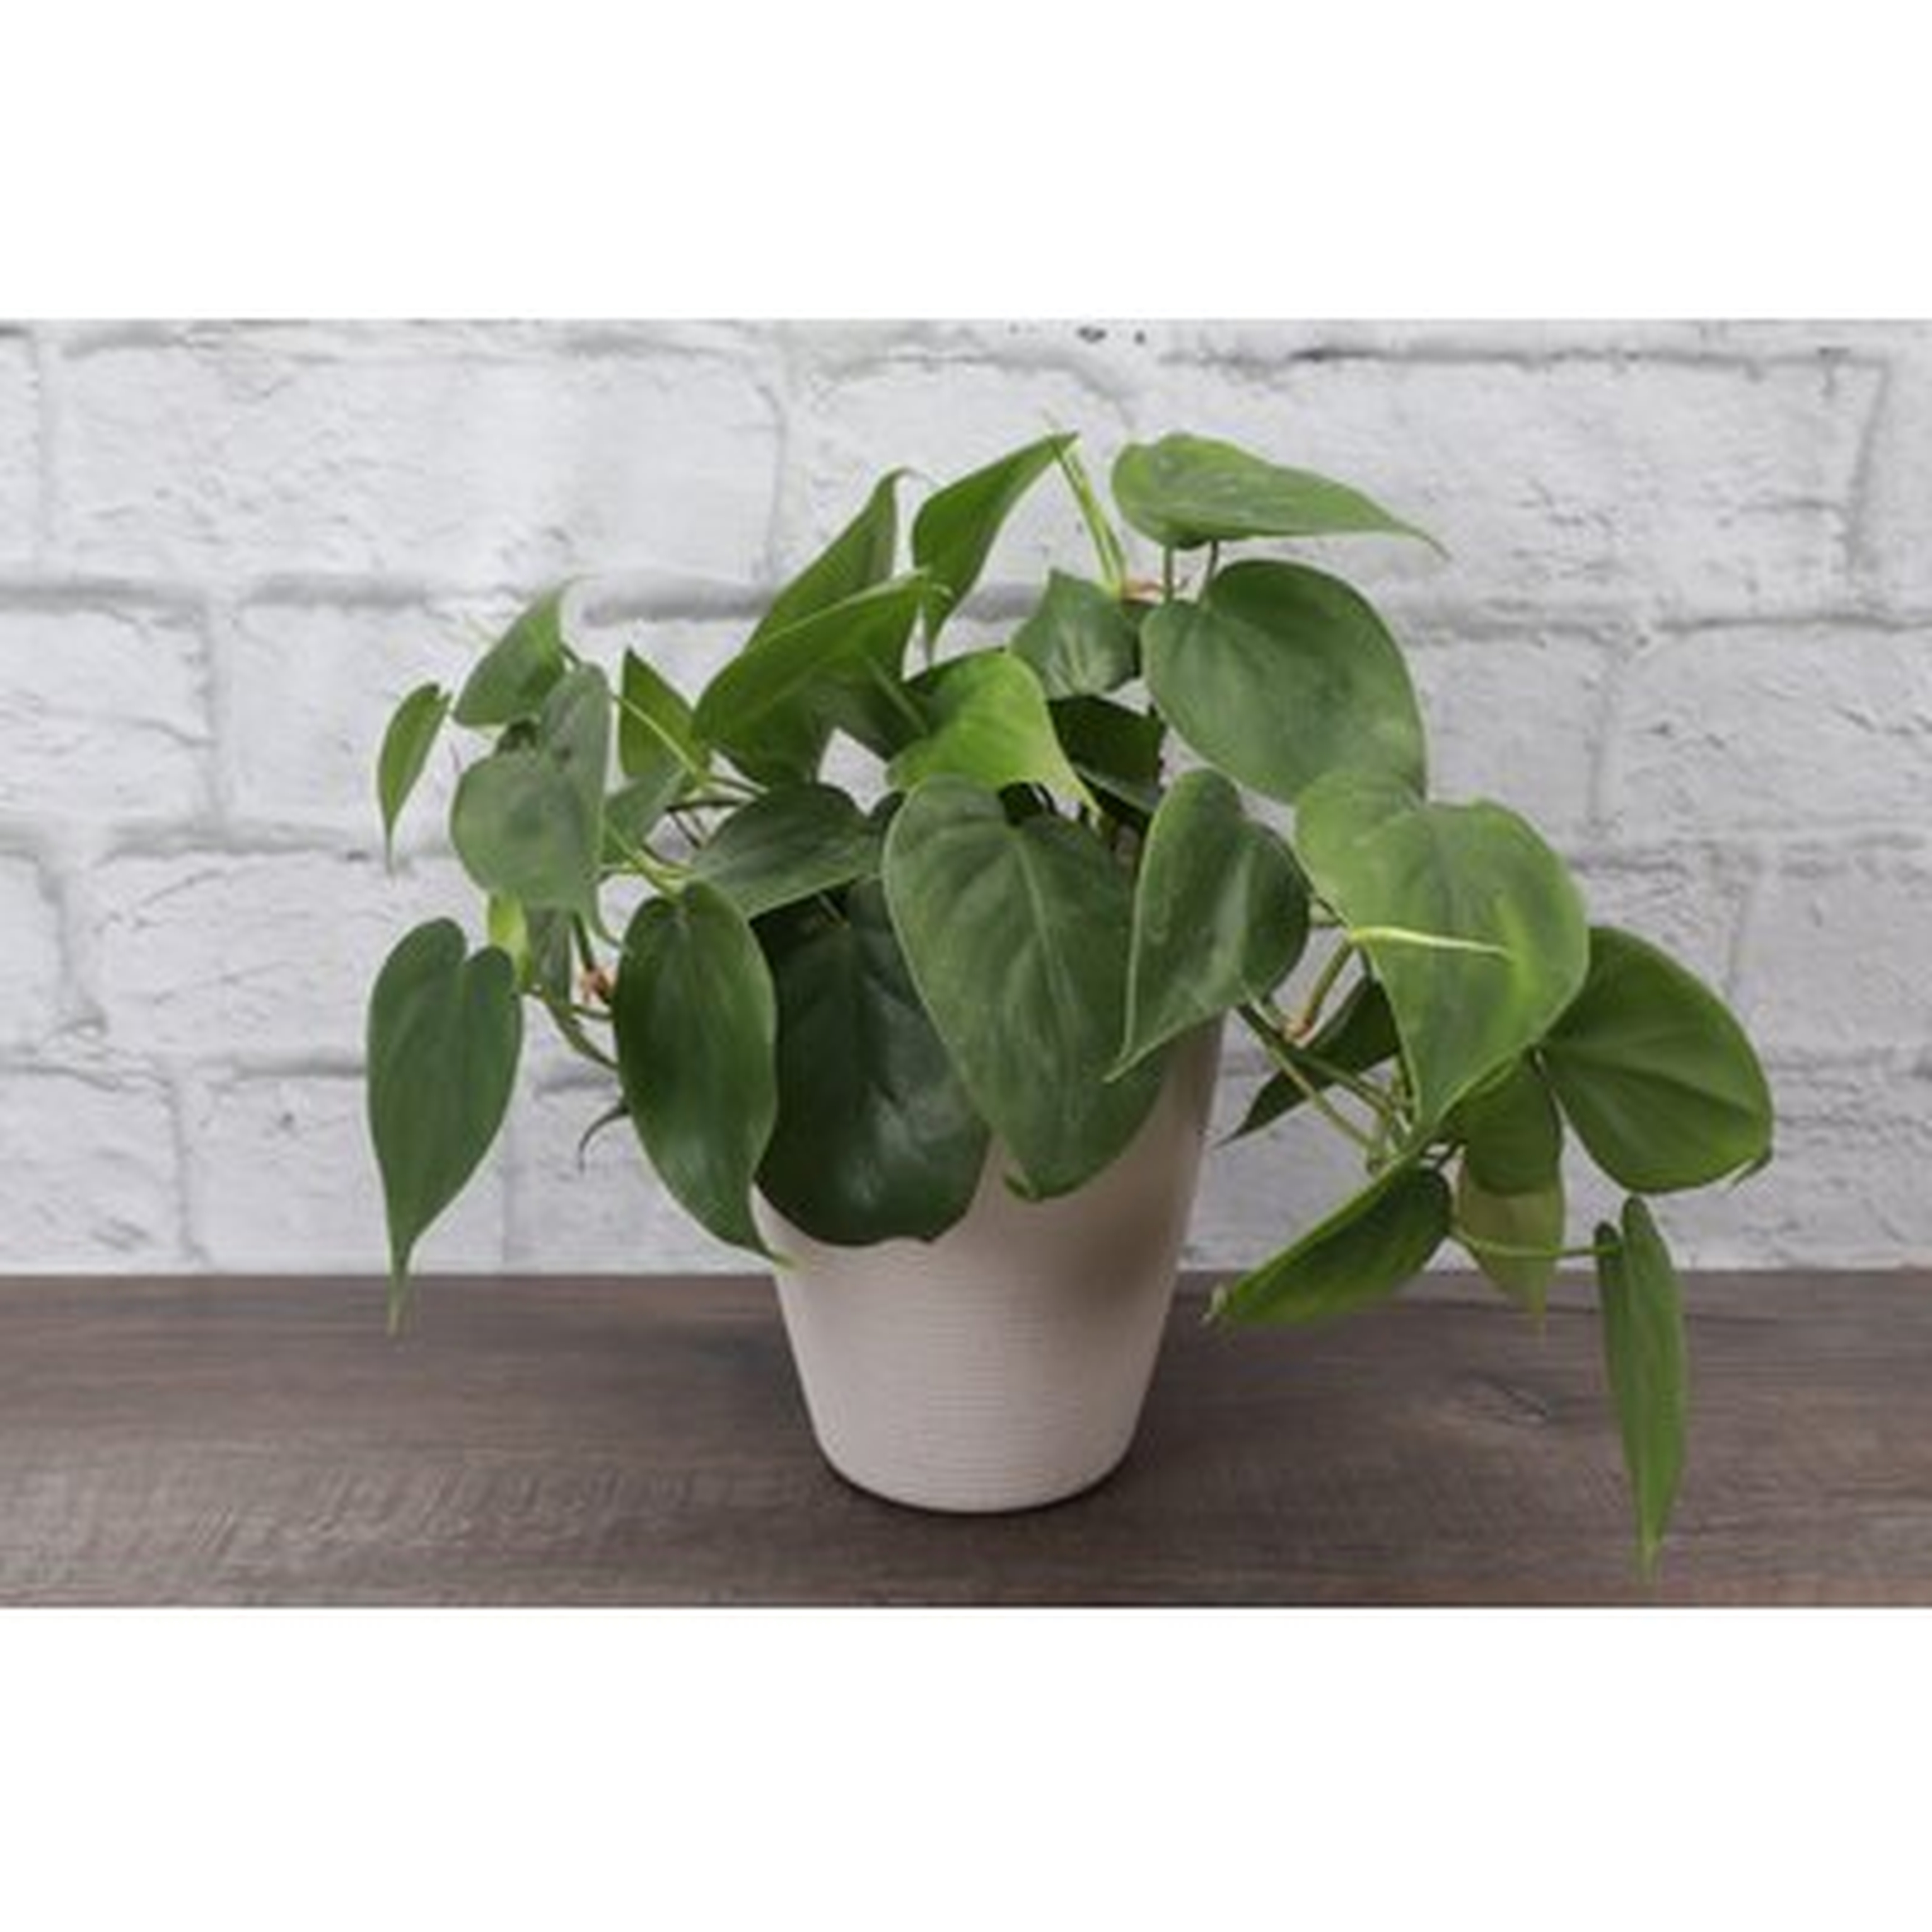 5'' Live Philodendron Plant in Planter - Wayfair